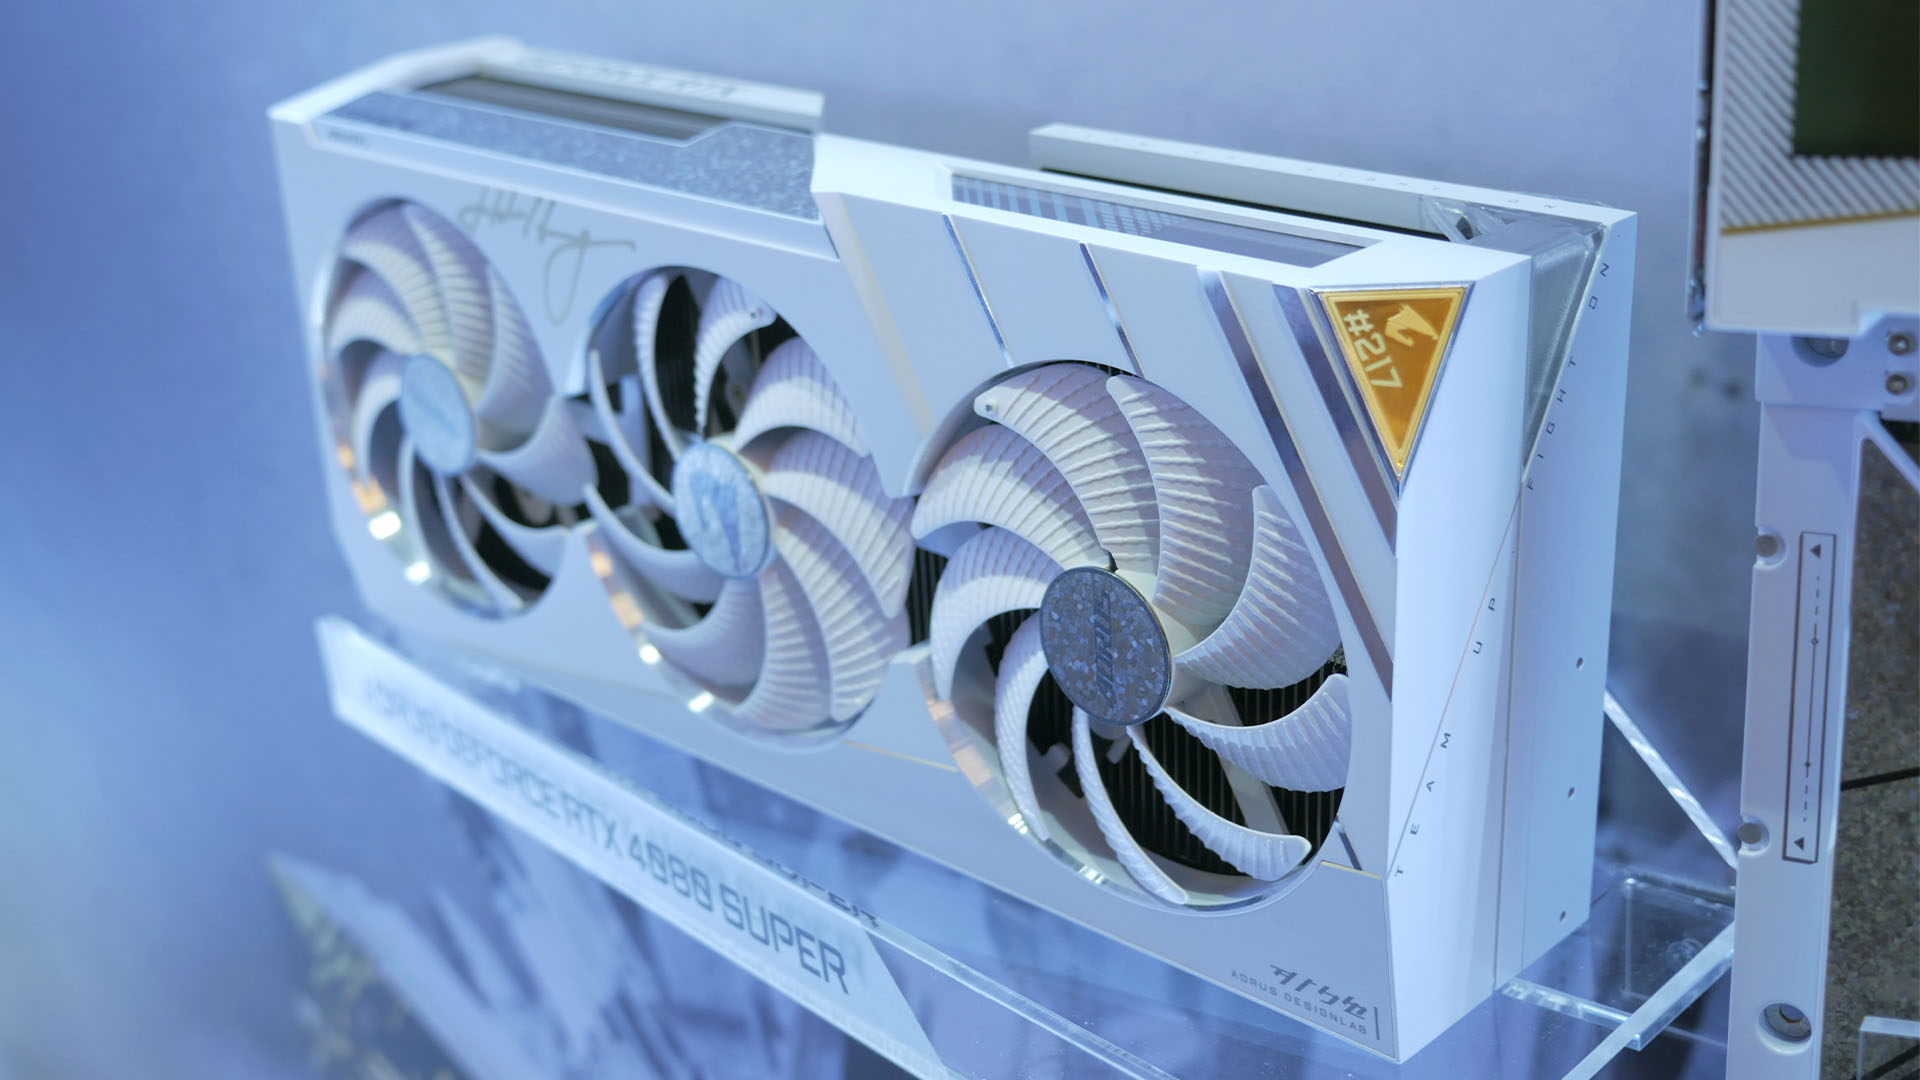 We just got hands on with the fanciest GPU and motherboard you can buy